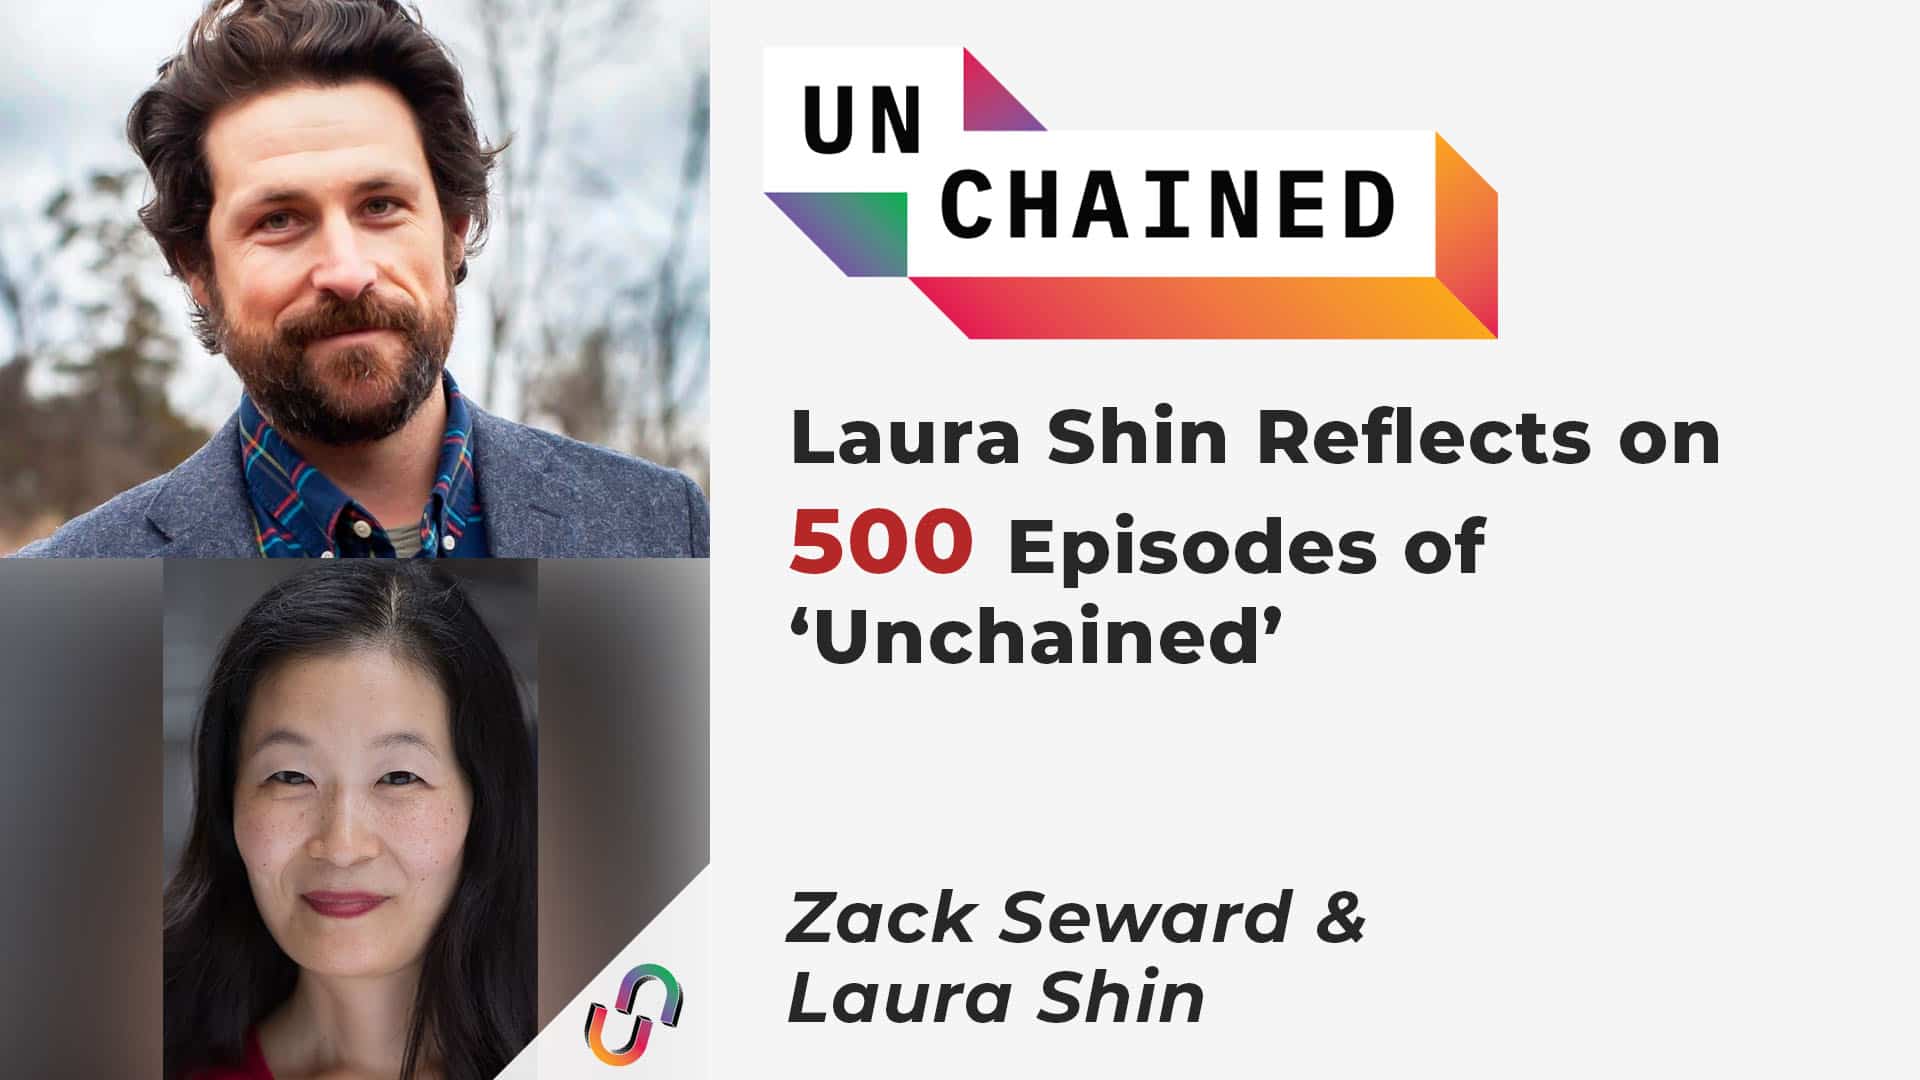 Laura Shin Reflects on 500 Episodes of ‘Unchained’ - Ep.500